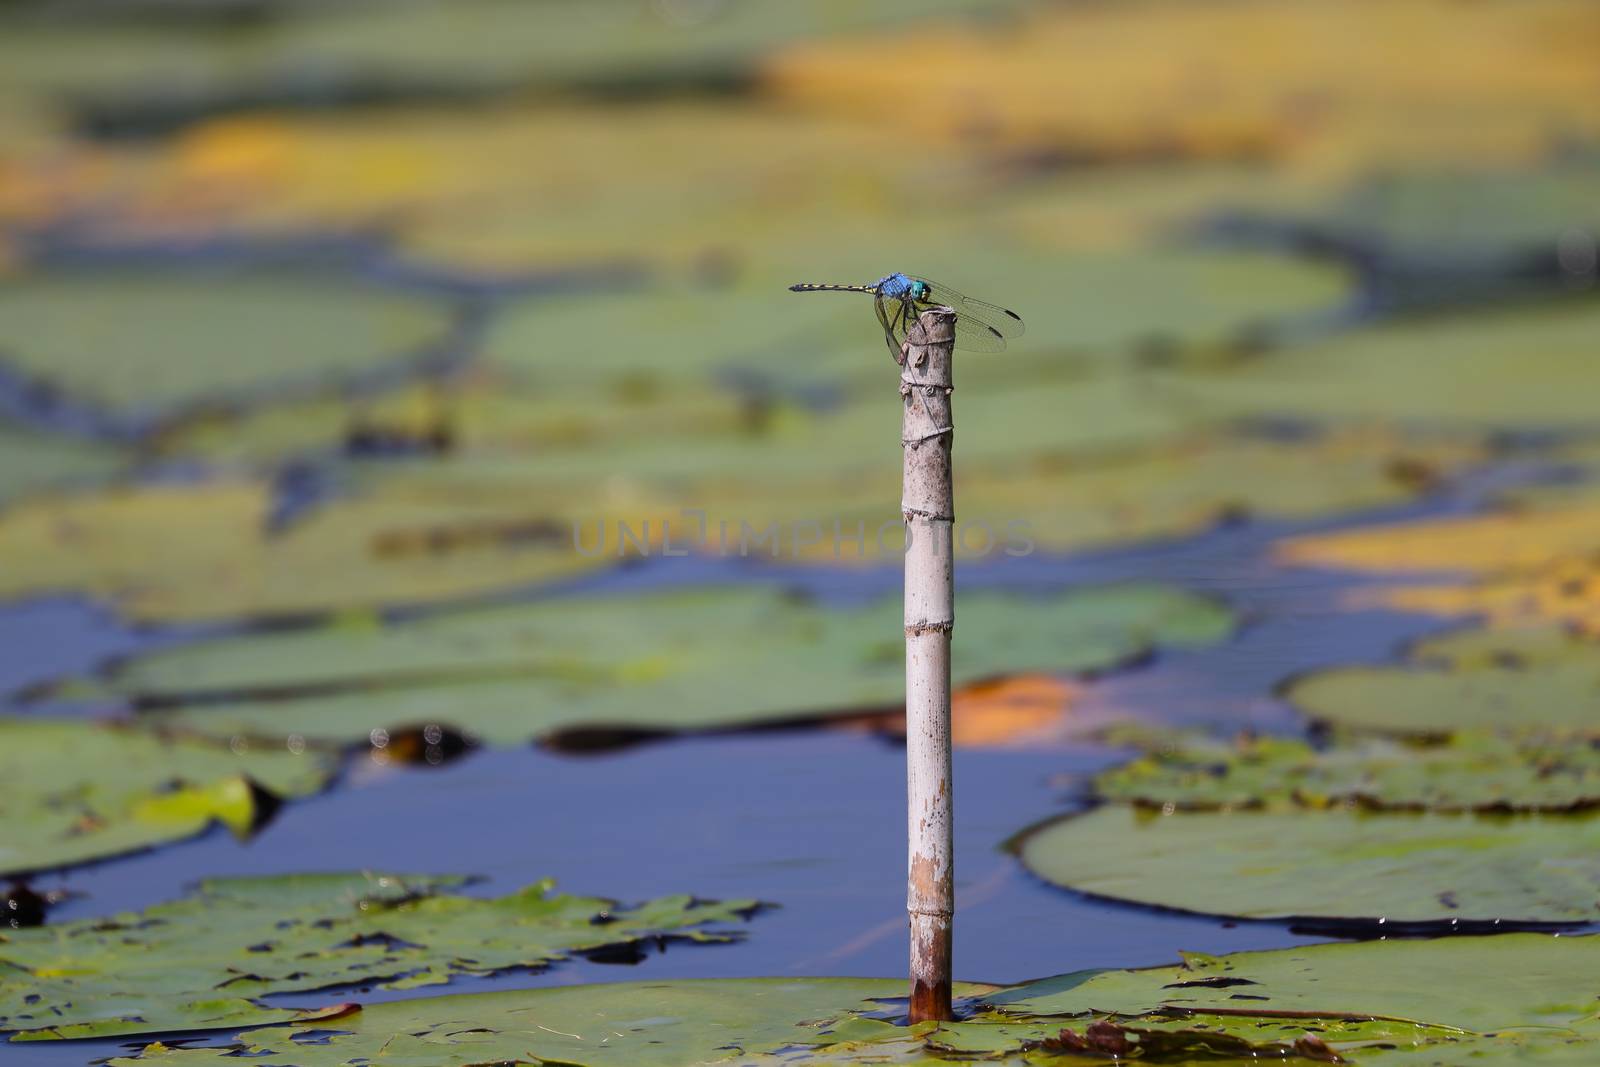 Jaunty dropwing dragonfly (Trithemis stictica) perched on reed stalk tip in a pond, Groot Marico, South Africa